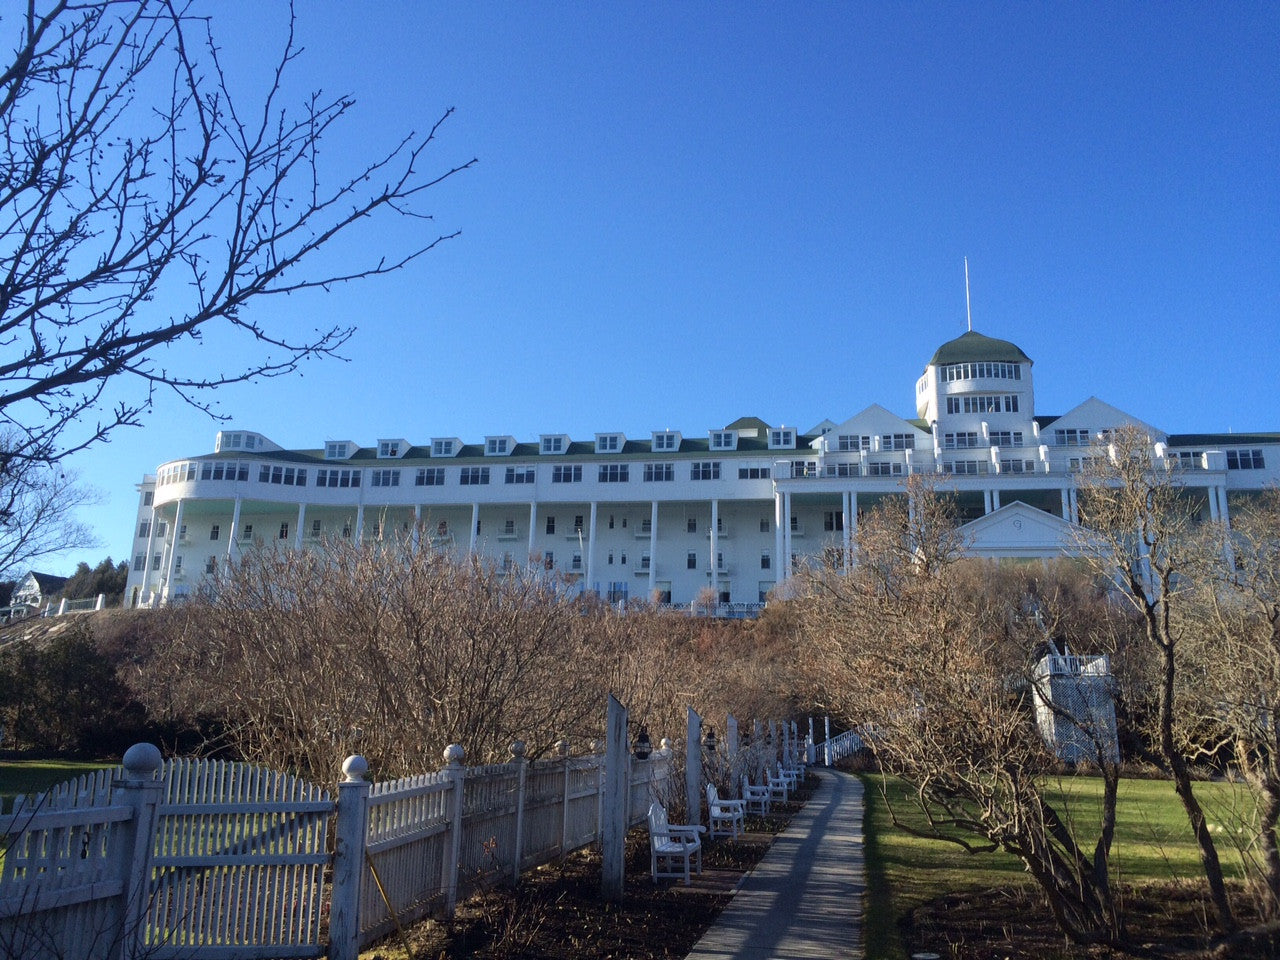 Spring is in the air at Grand Hotel Mackinac Island, Michigan!